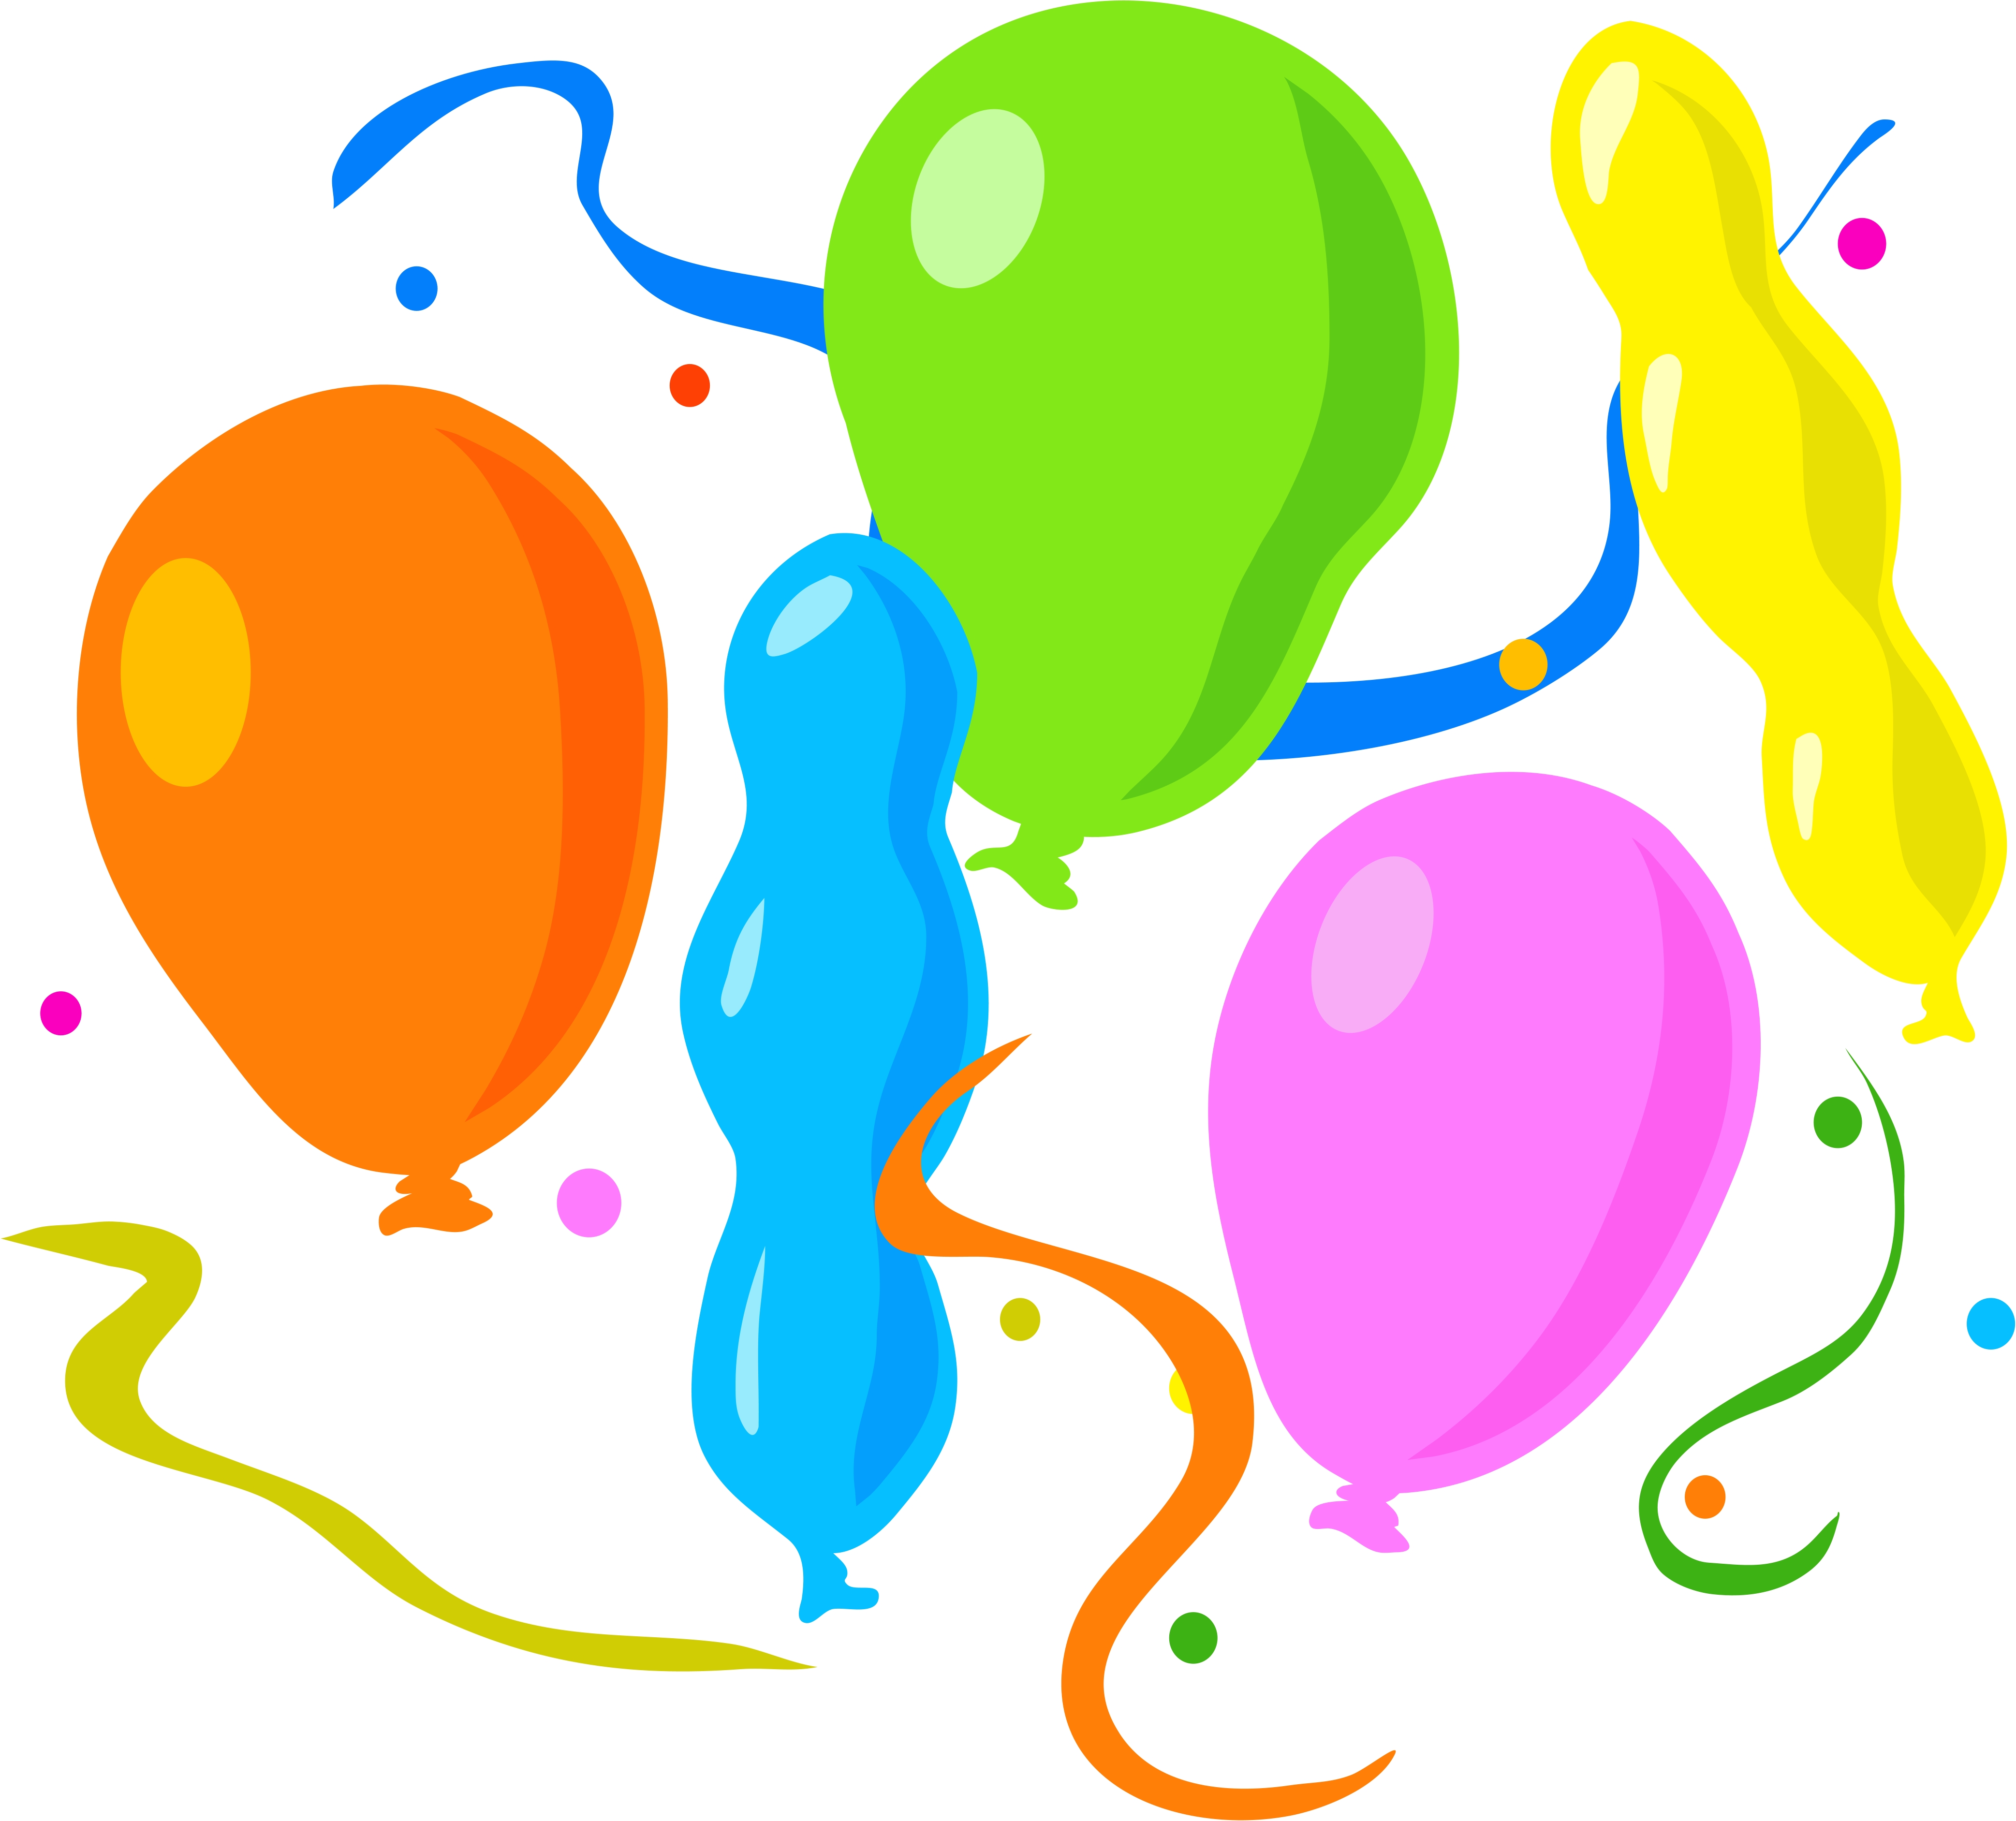 Balloons | Free Images - vector clip art online ...